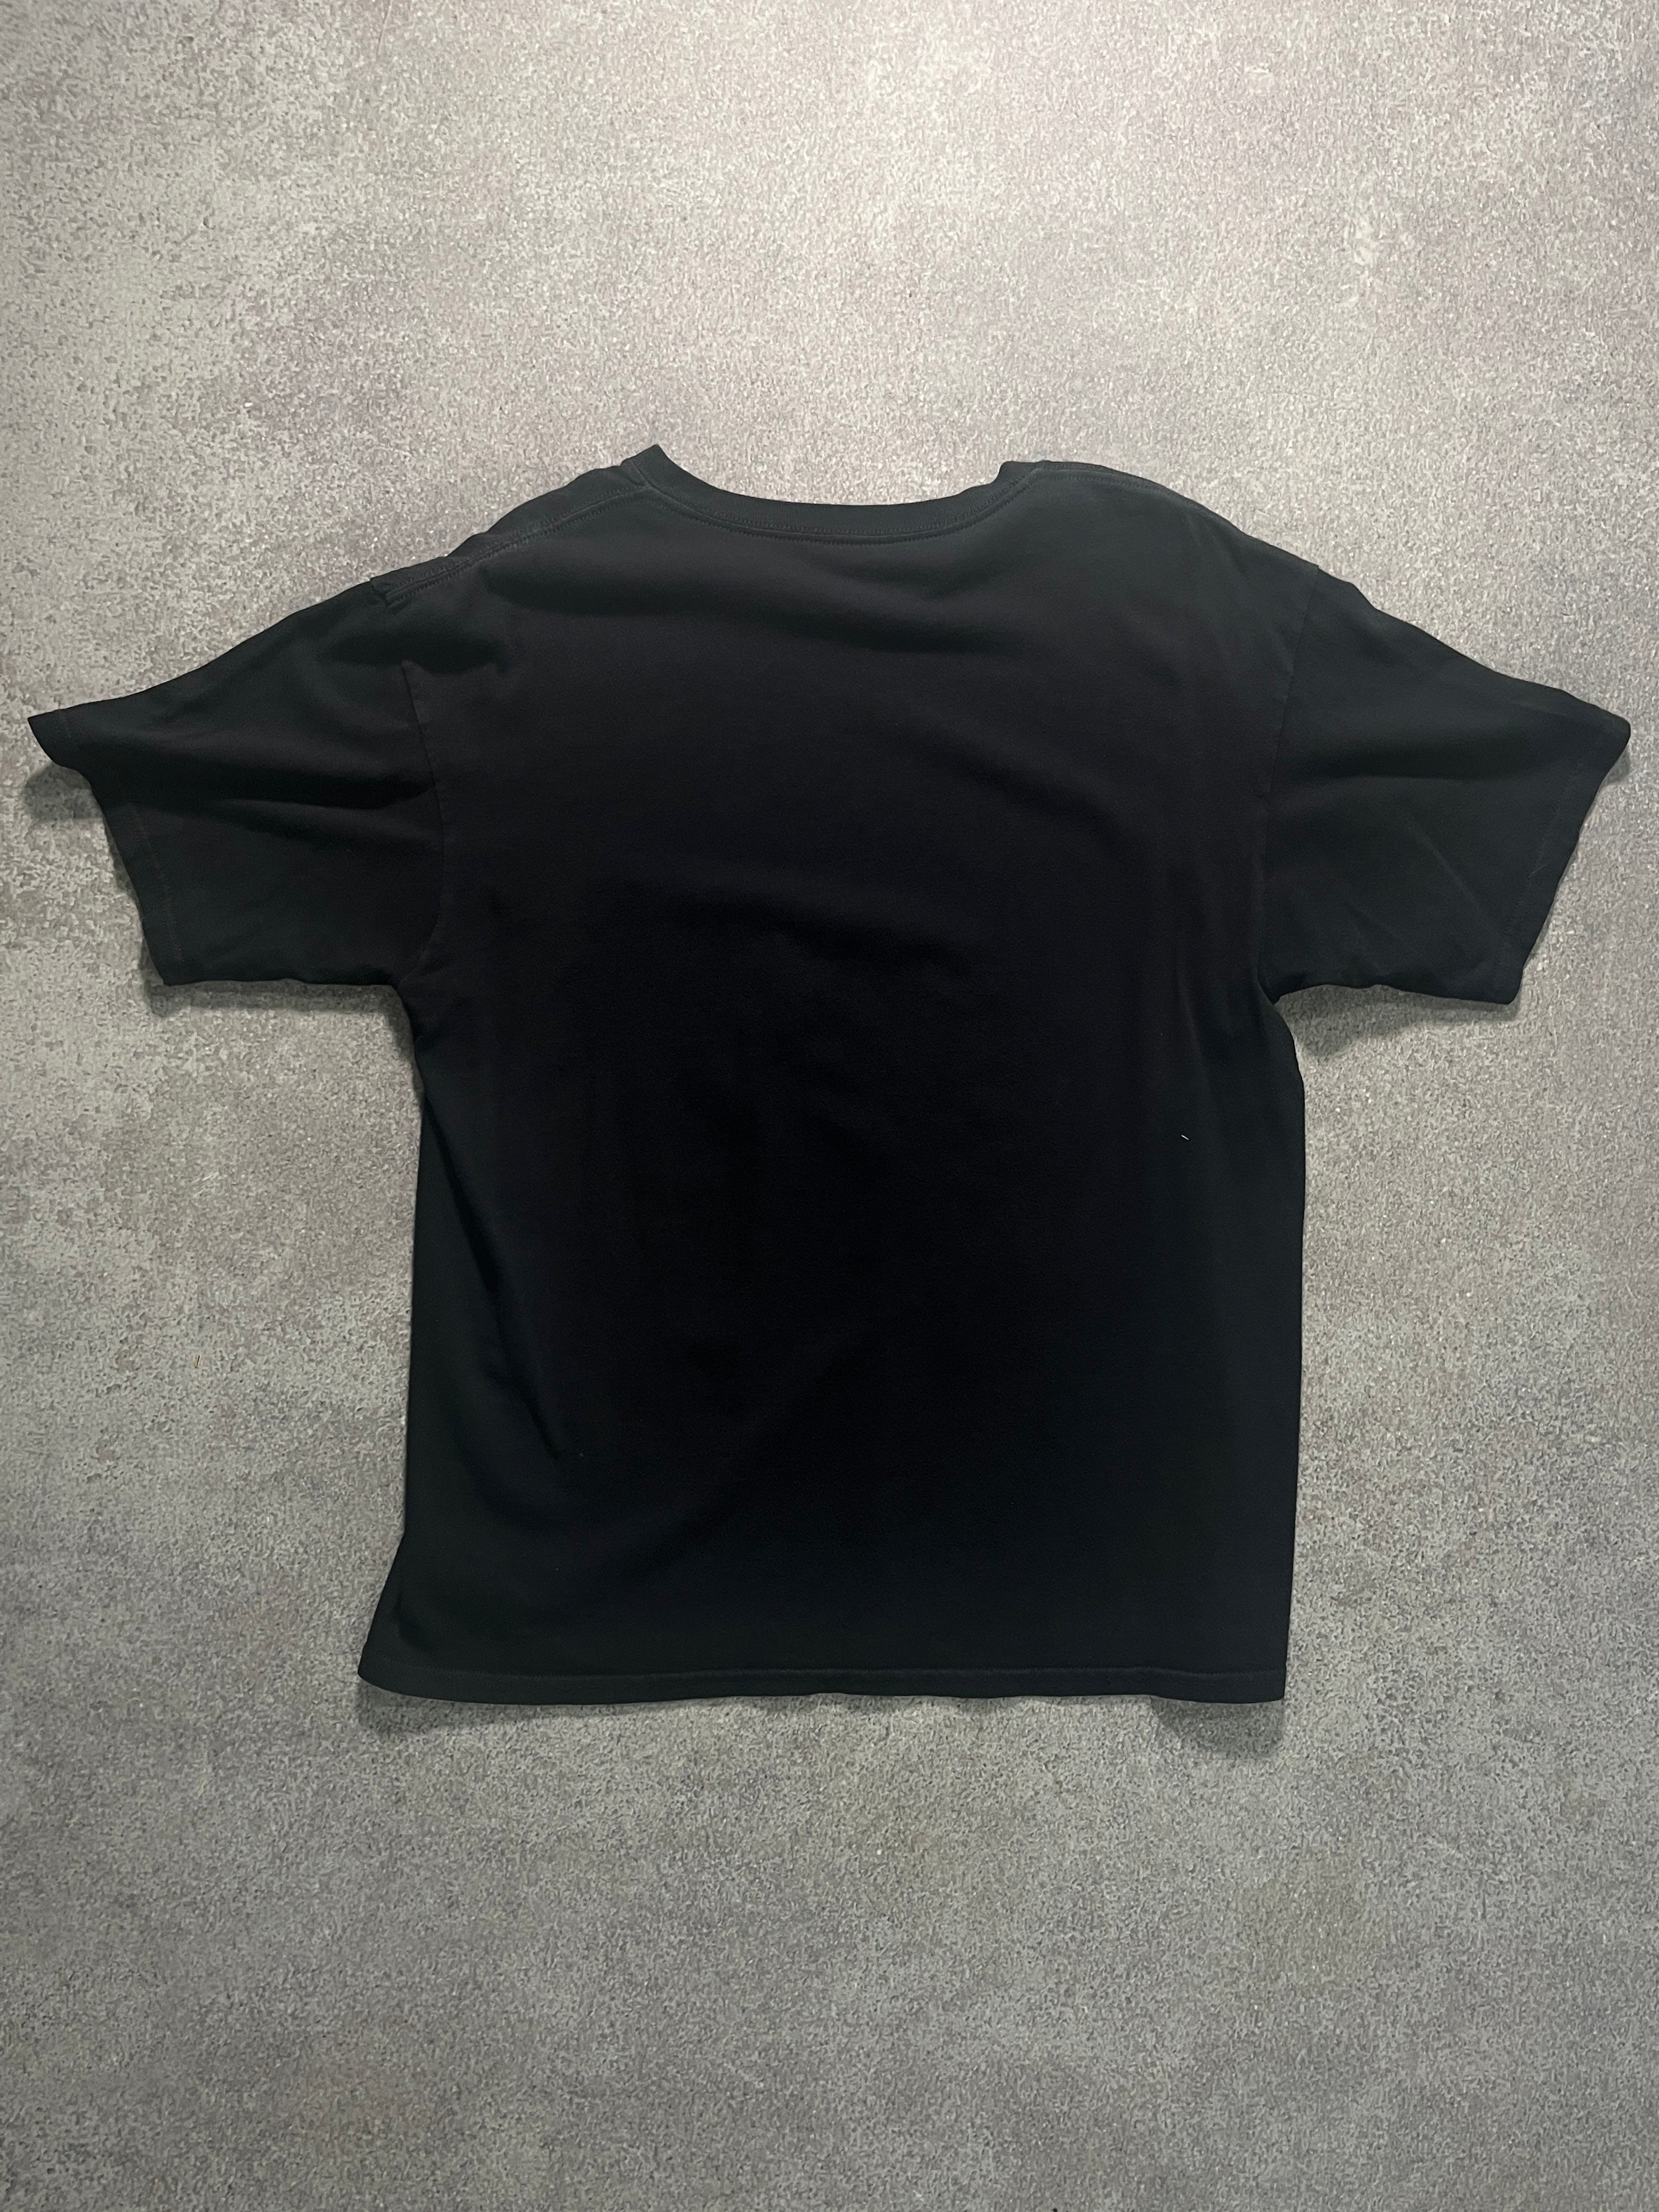 Vintage Suffocstion T Shirt Black // Small - RHAGHOUSE VINTAGE